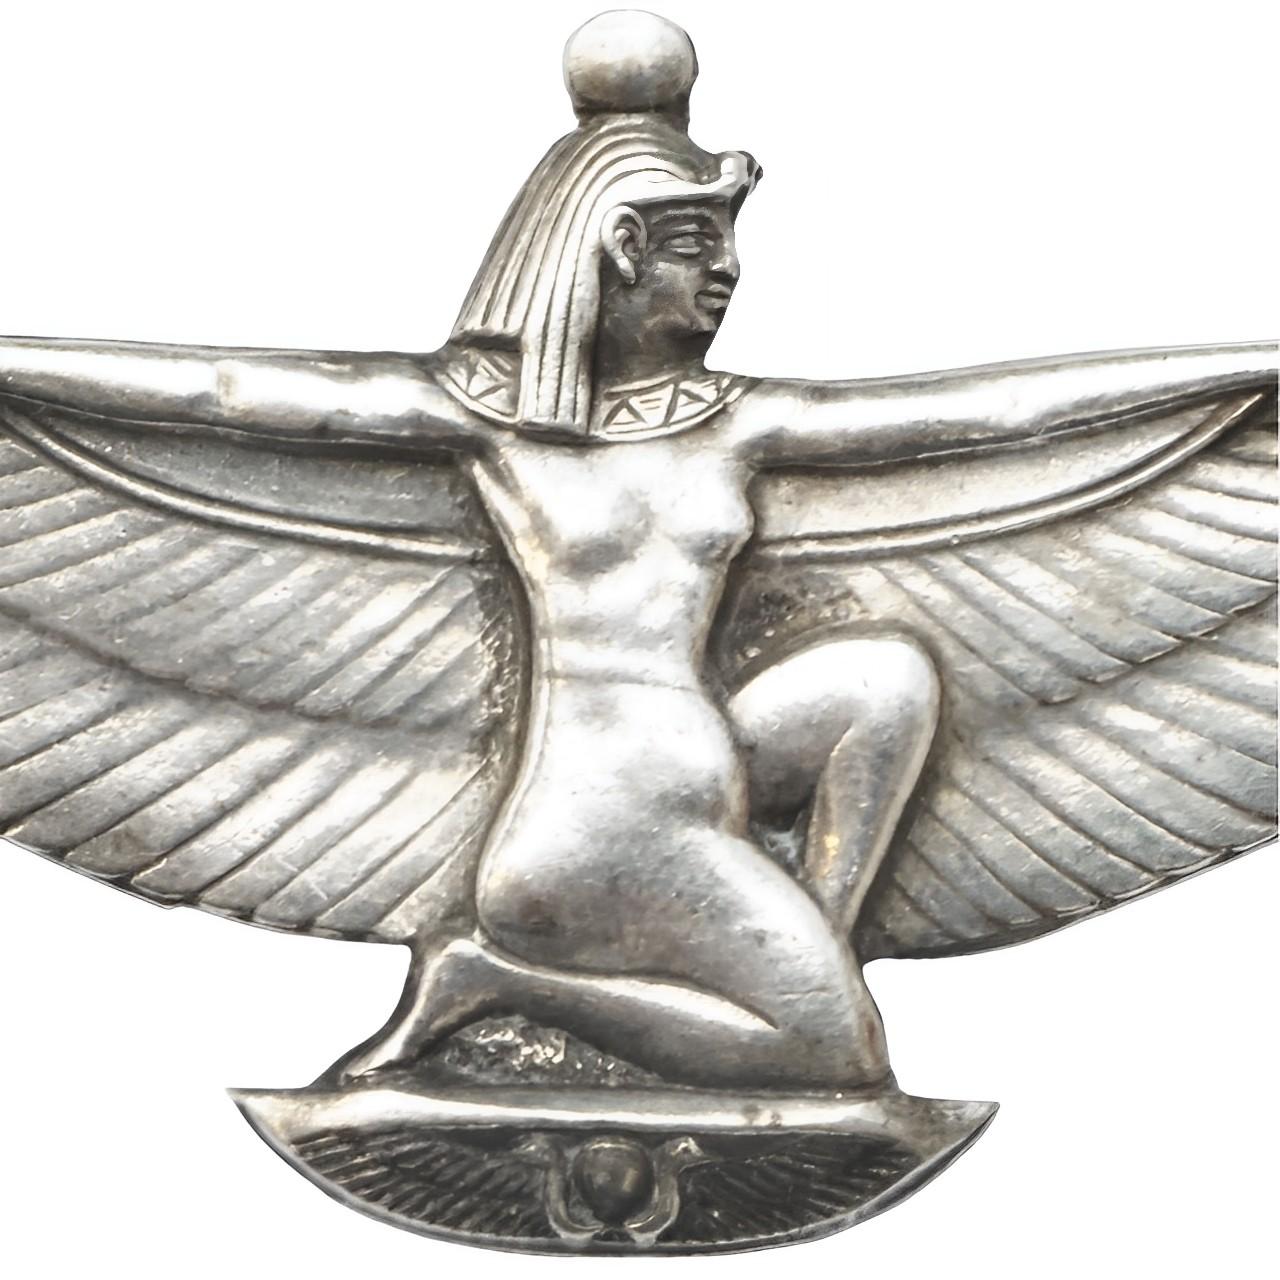 Wonderful Egyptian Revival silver Isis goddess brooch. Measuring length 5.1 cm / 2 inches by maximum width 2.7 cm / 1 inch. The pin is bent but works well. The brooch tests for silver. We have given it a light clean.

This beautiful silver Egyptian